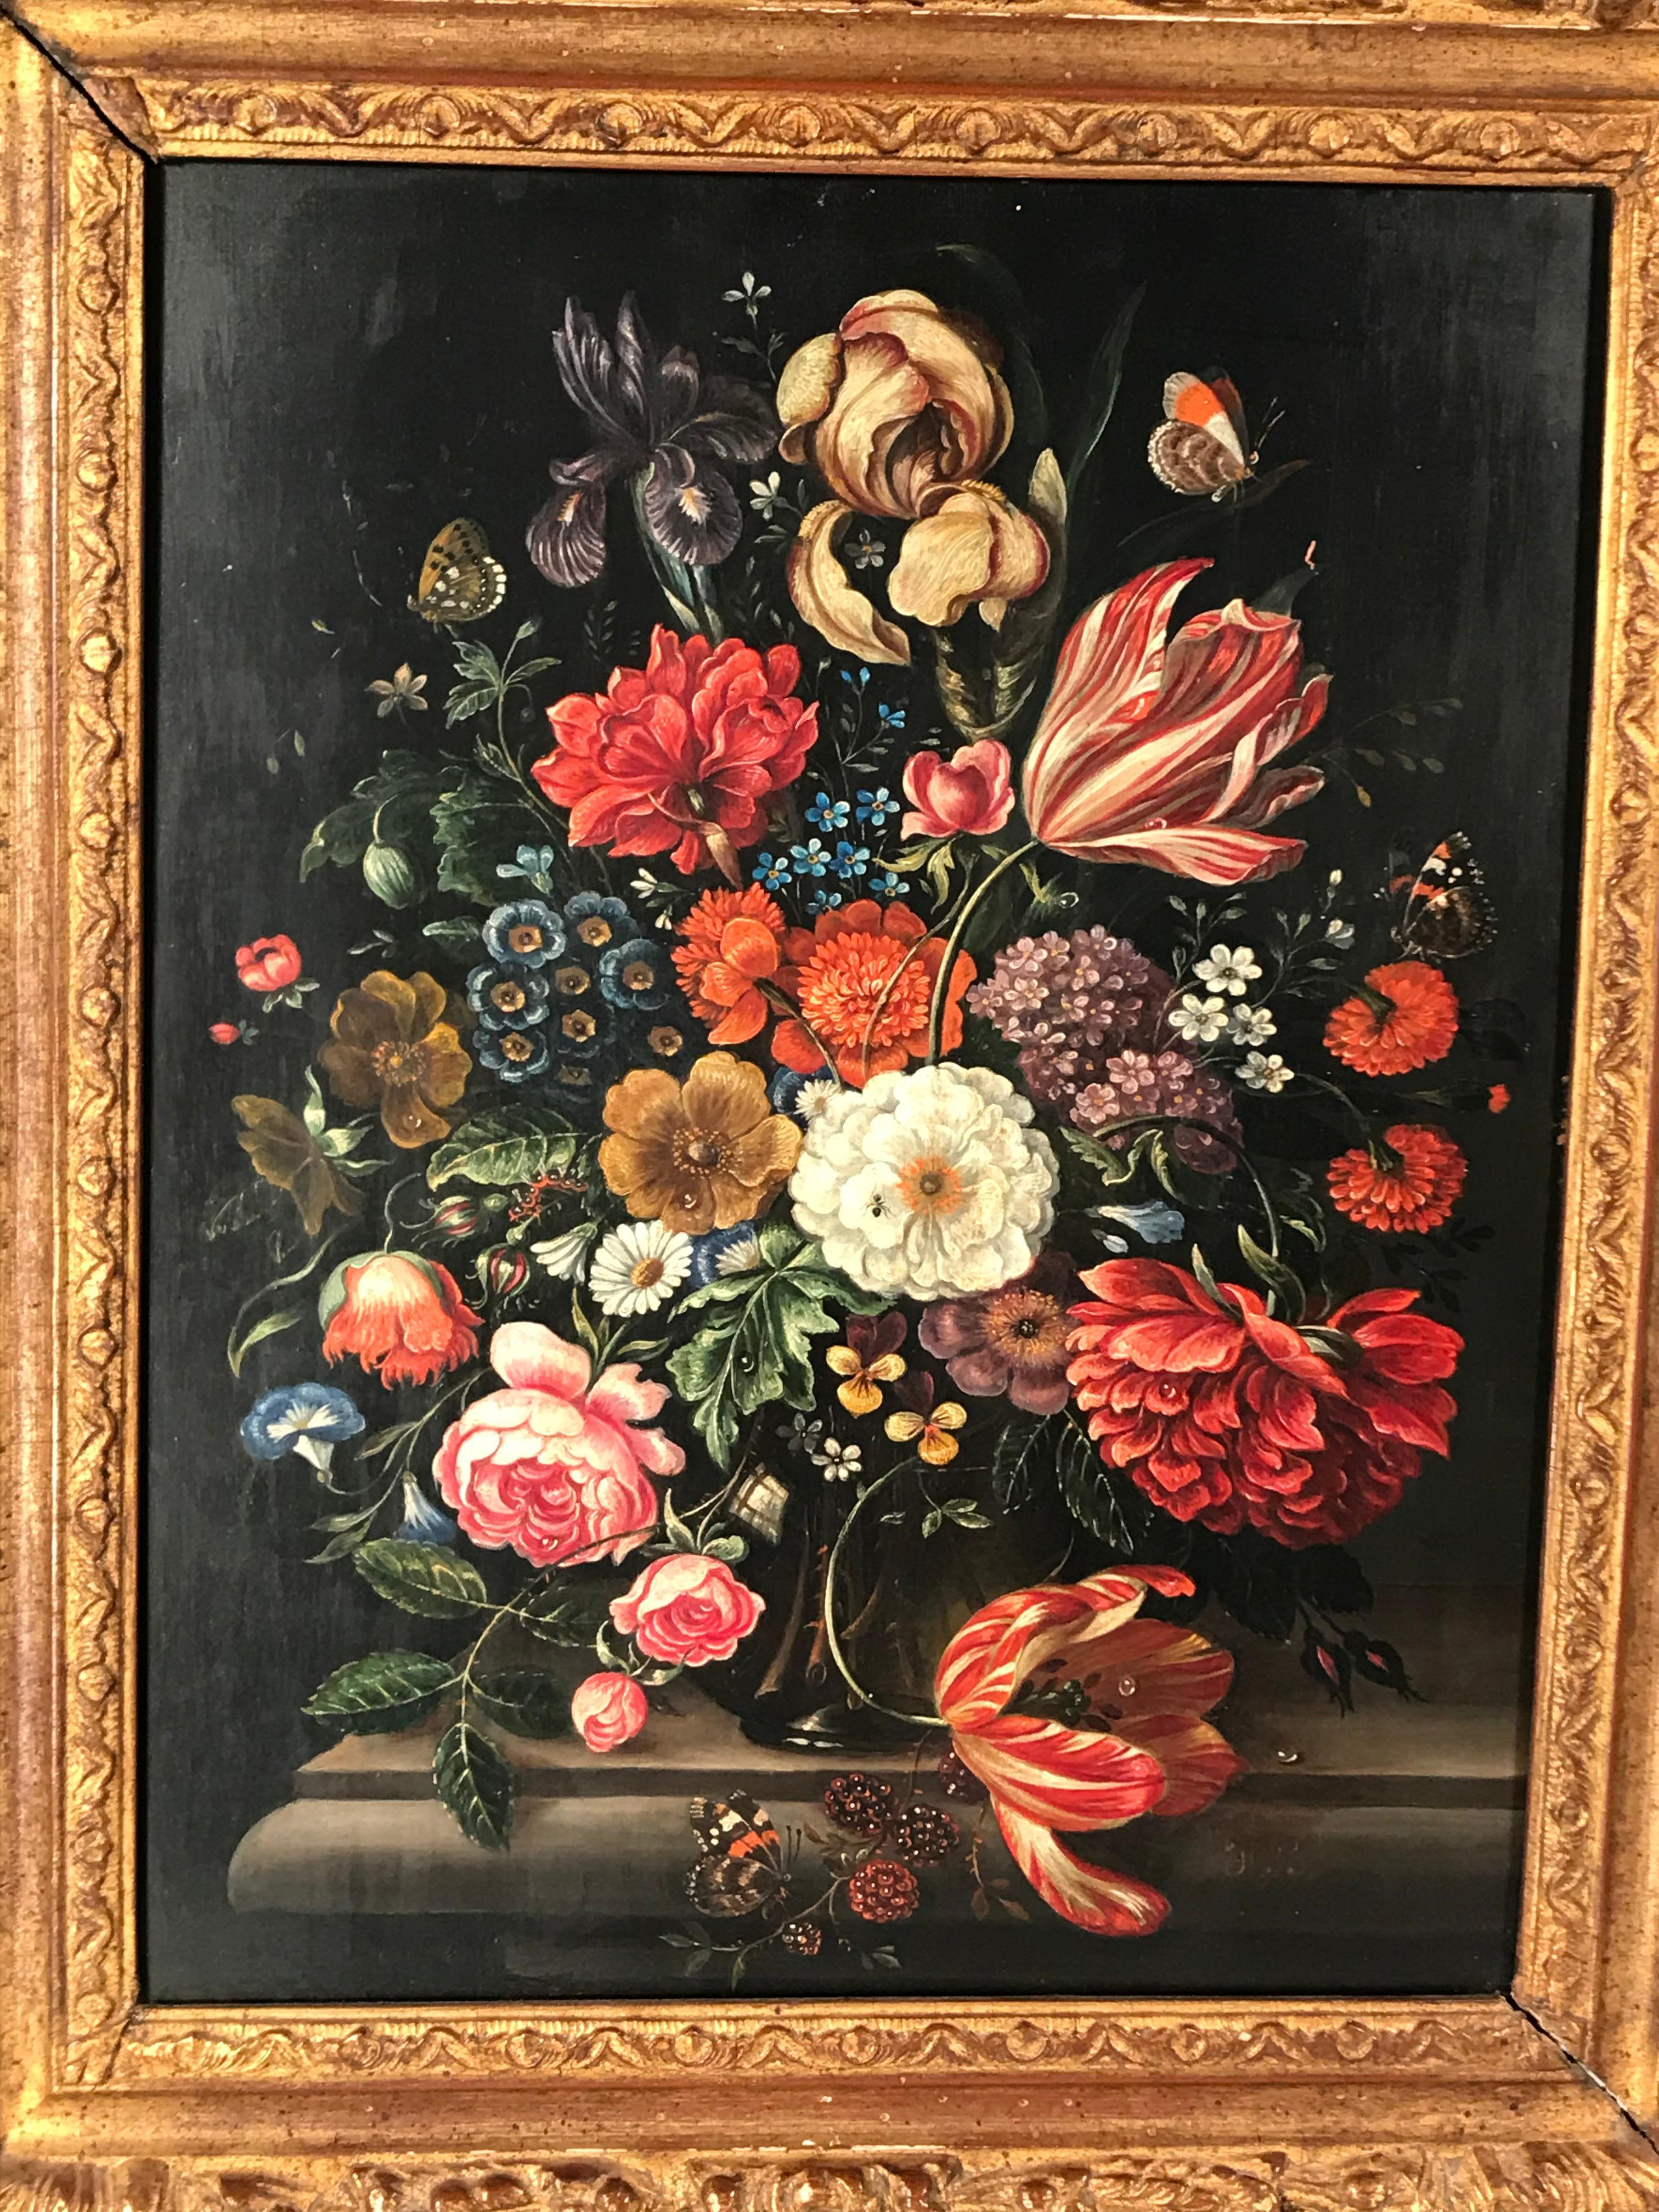 Flower still life, oil painting on copper, Belgium second half of the 19th century. Beautiful painting with a nicely carved giltwood frame. Not signed. The measurements are with frame. (25.19 x 21.25 inches/ 64 x 54 cm)
